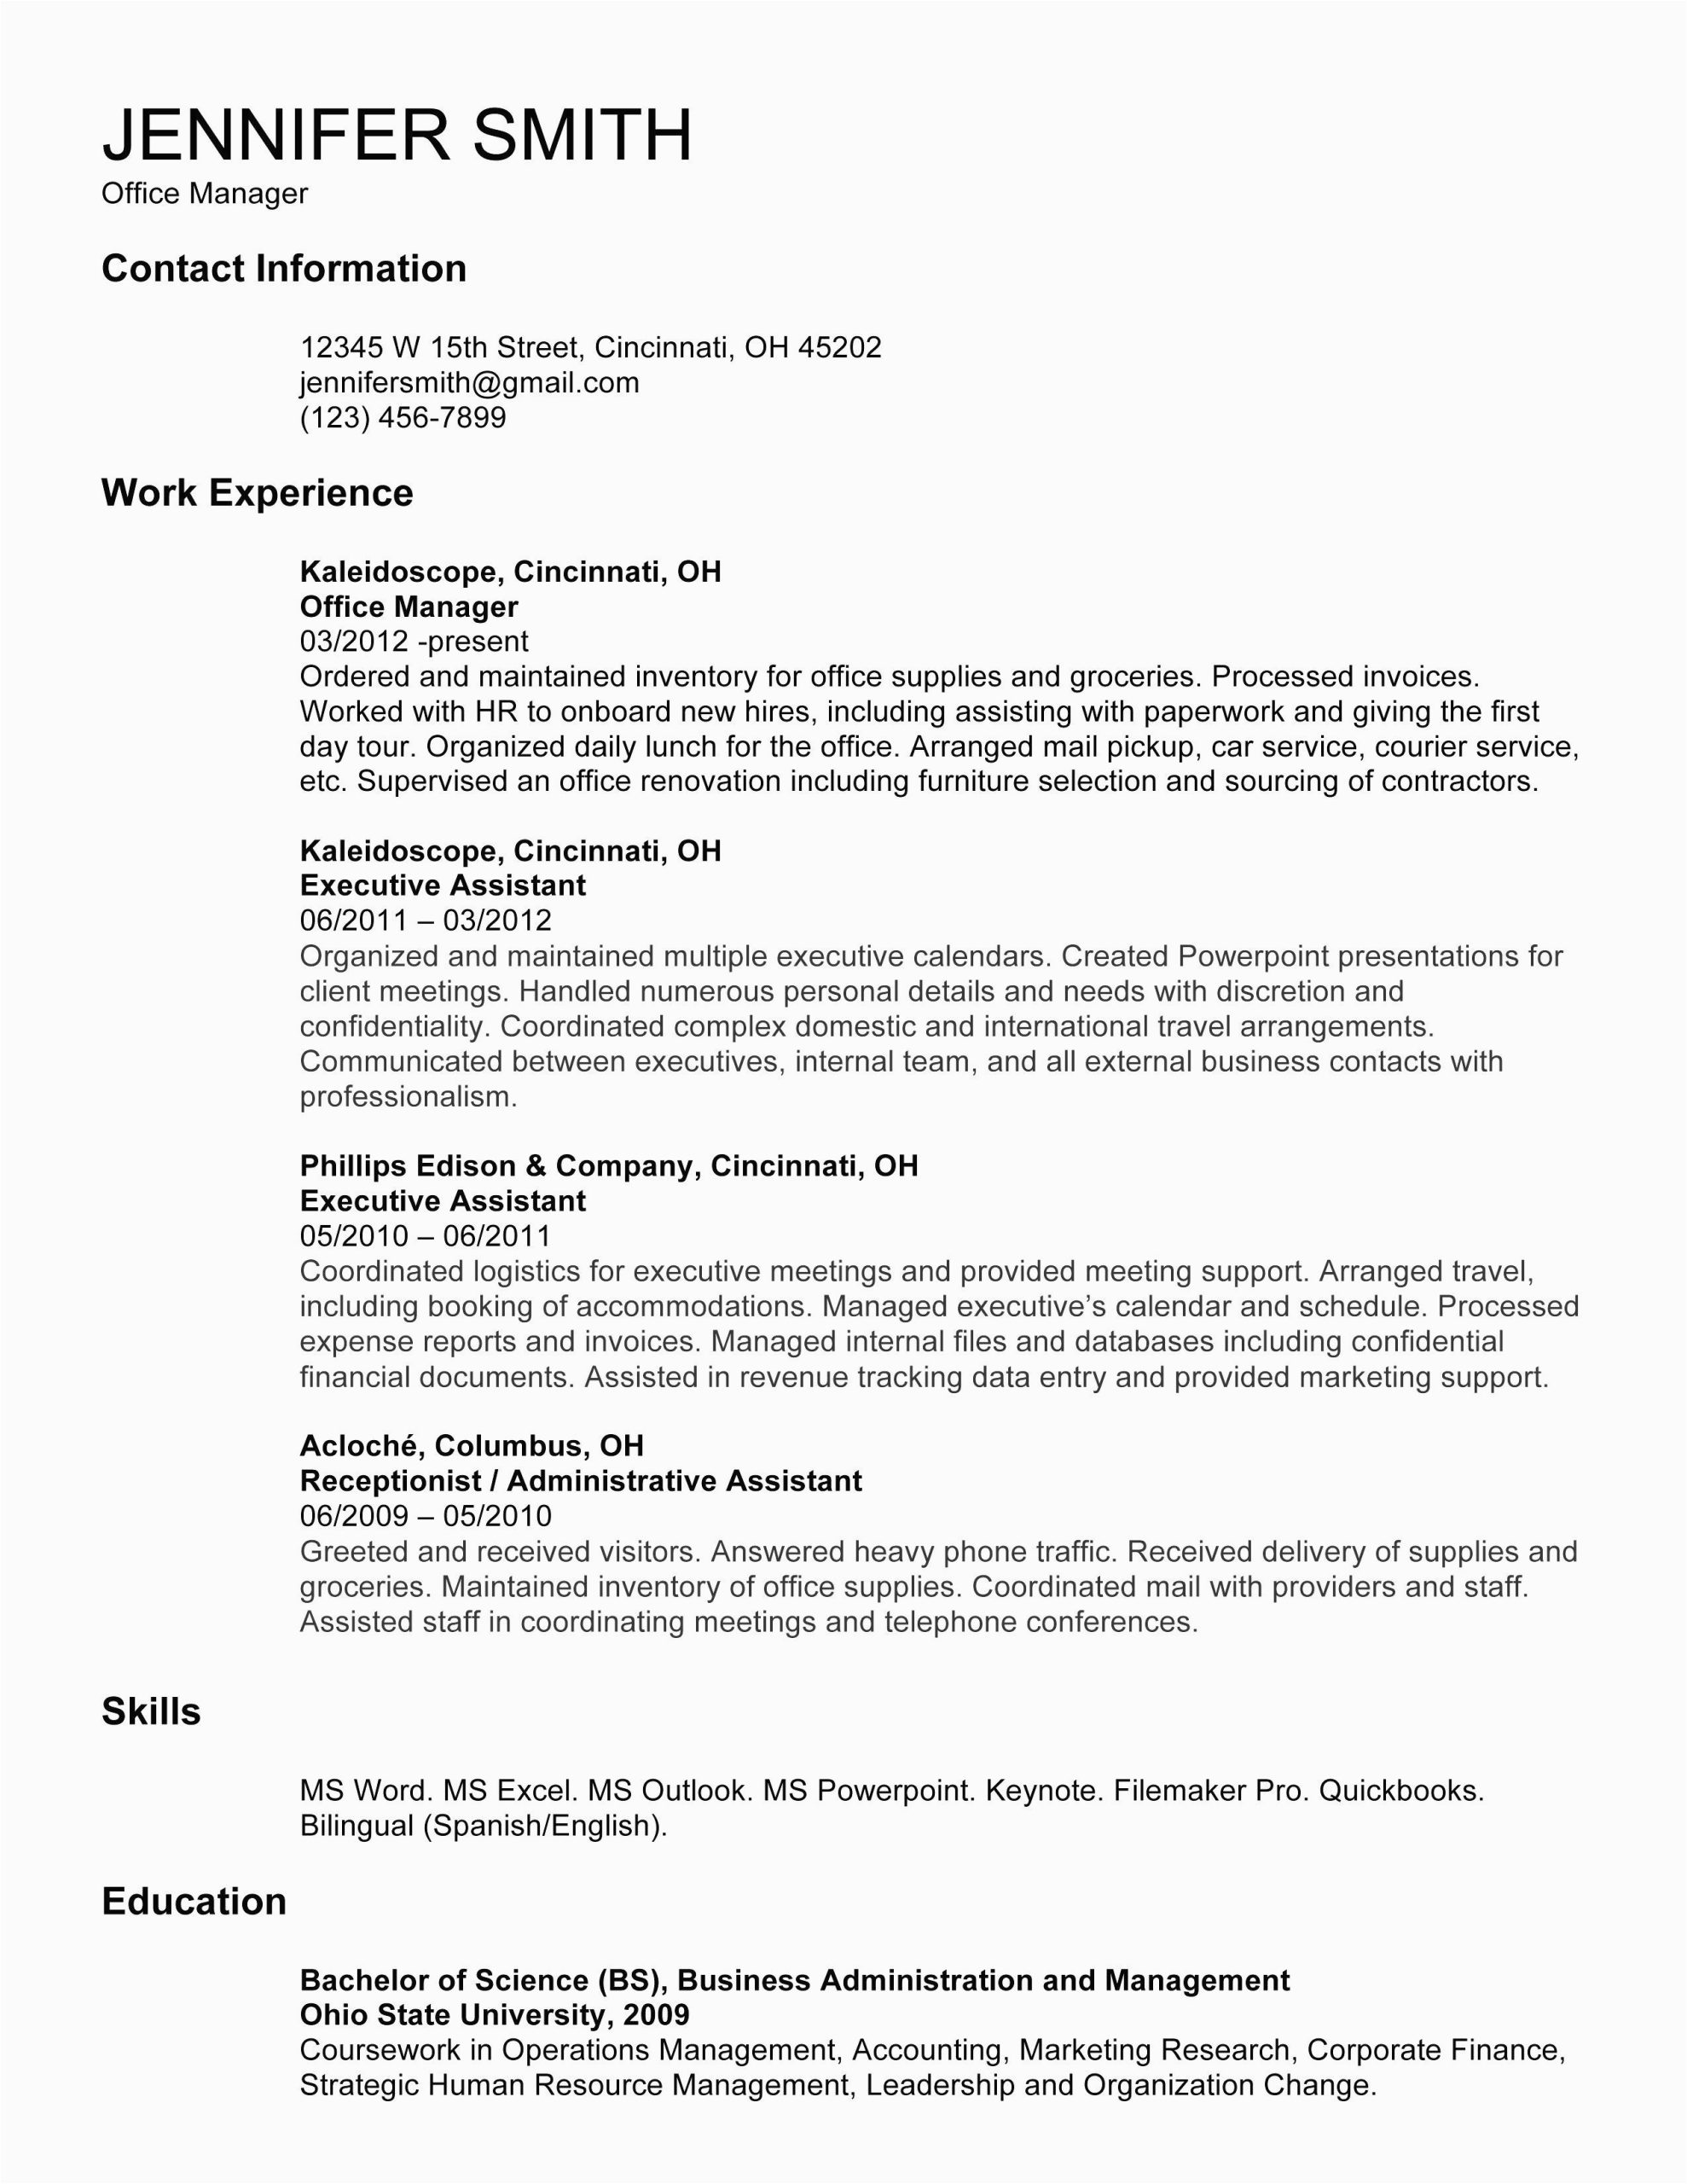 Sample Resume Different Positions Same Company Resume Example Multiple Positions Same Pany